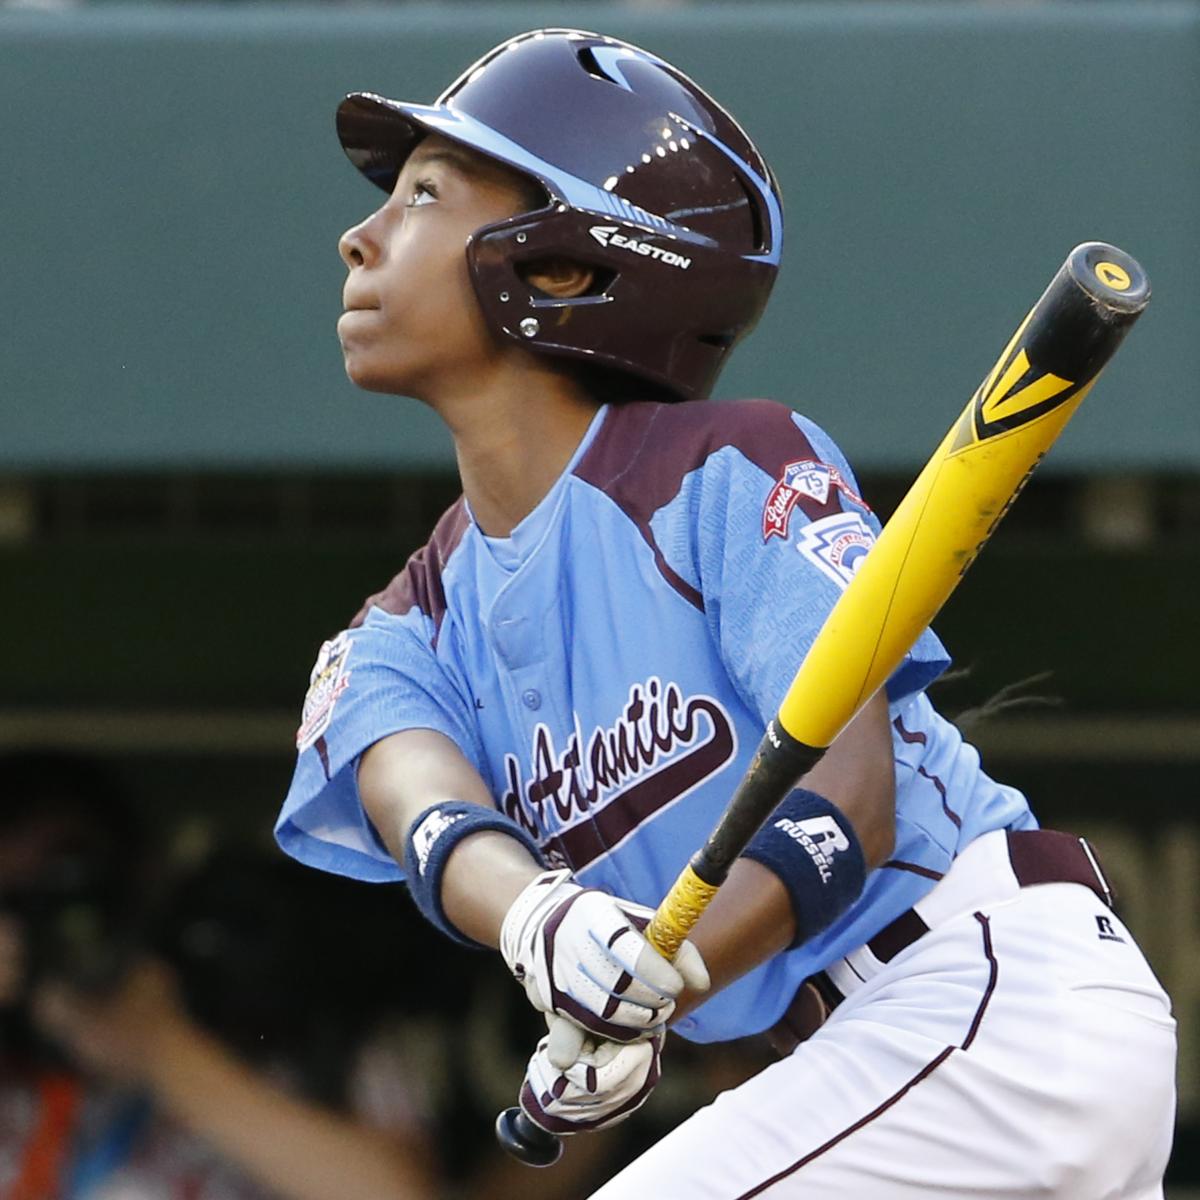 LLWS 2014 Full Preview for Wednesday's Schedule of Games News